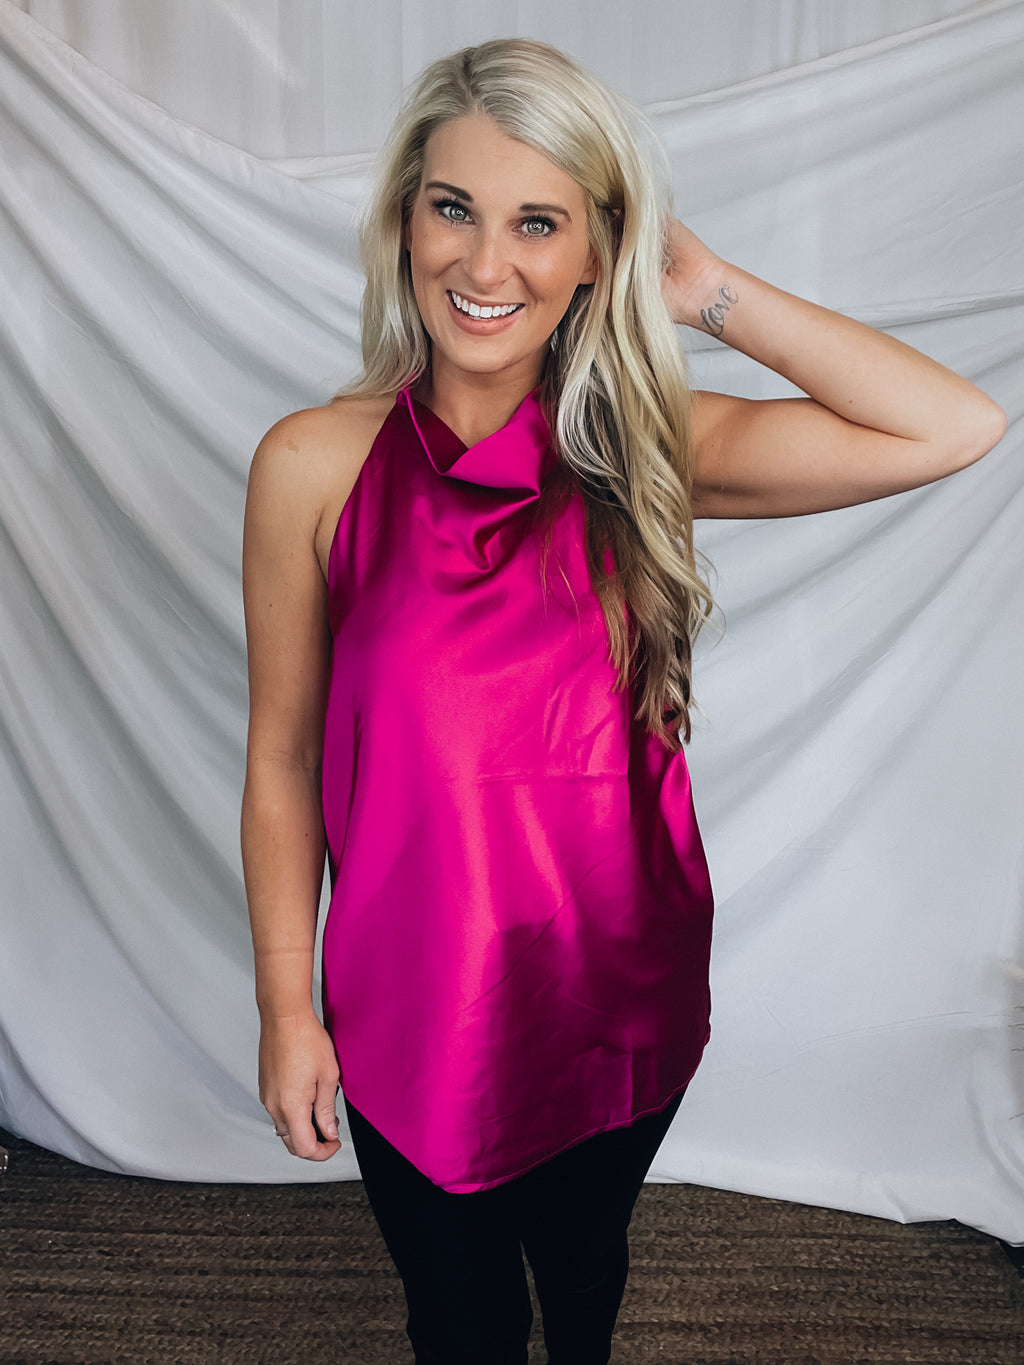 Top features a silky material, halter button closure neck line, sleeveless detail, backless detail, slight cowl neck and runs true to size!-MAGENTA